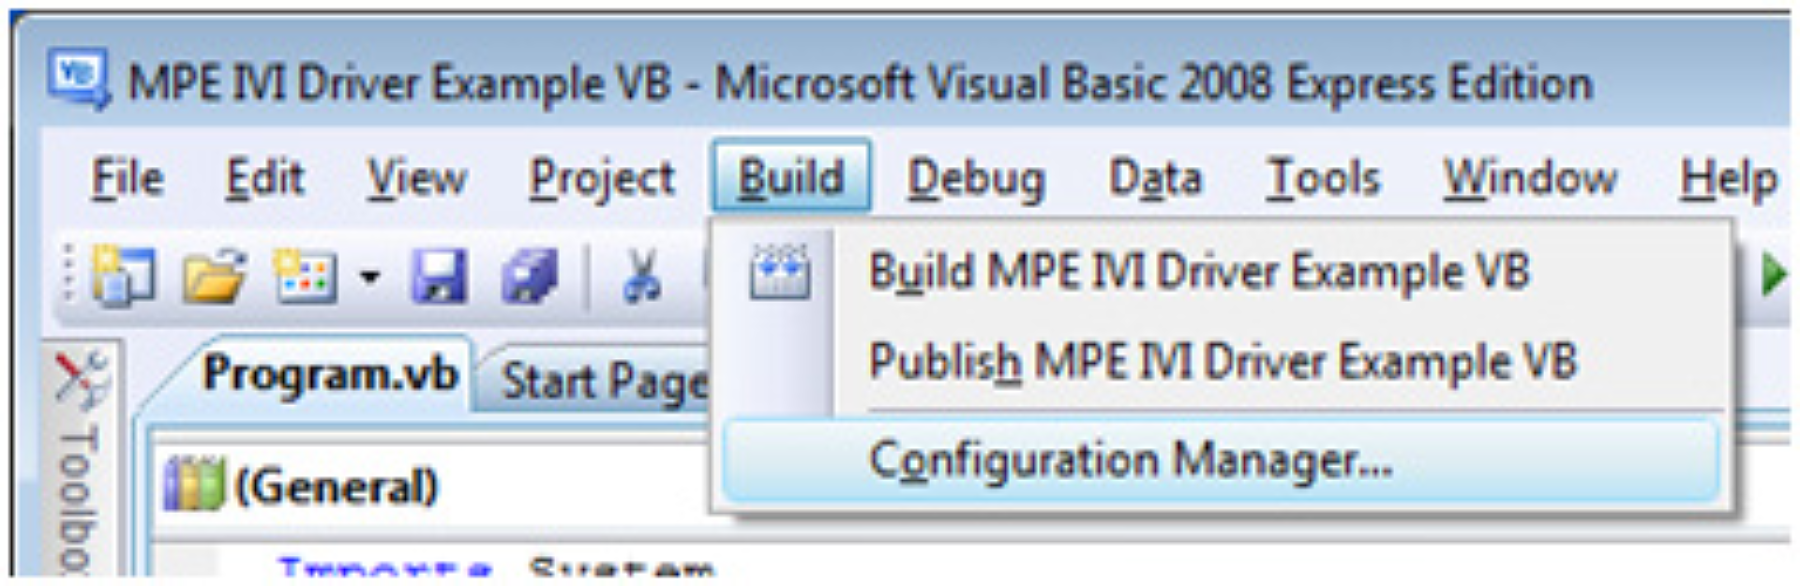 Figure 5. Configuration Manager menu now selectable from menu.